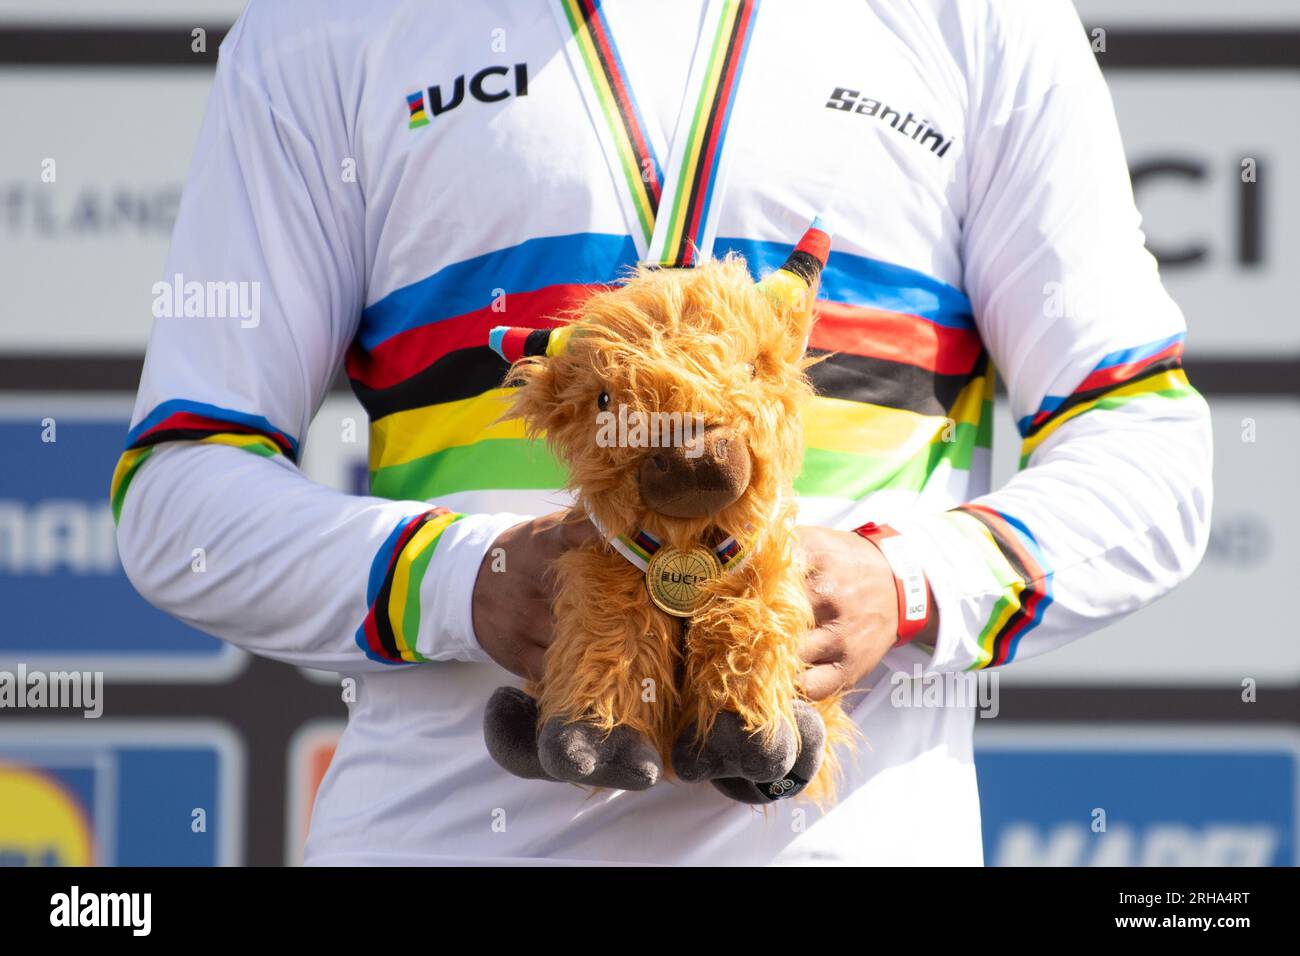 UCI Highland Cow stuff toy gift presented to medal winners at the UCI Cycling World Championships 2023 in Glasgow Scotland UK Stock Photo